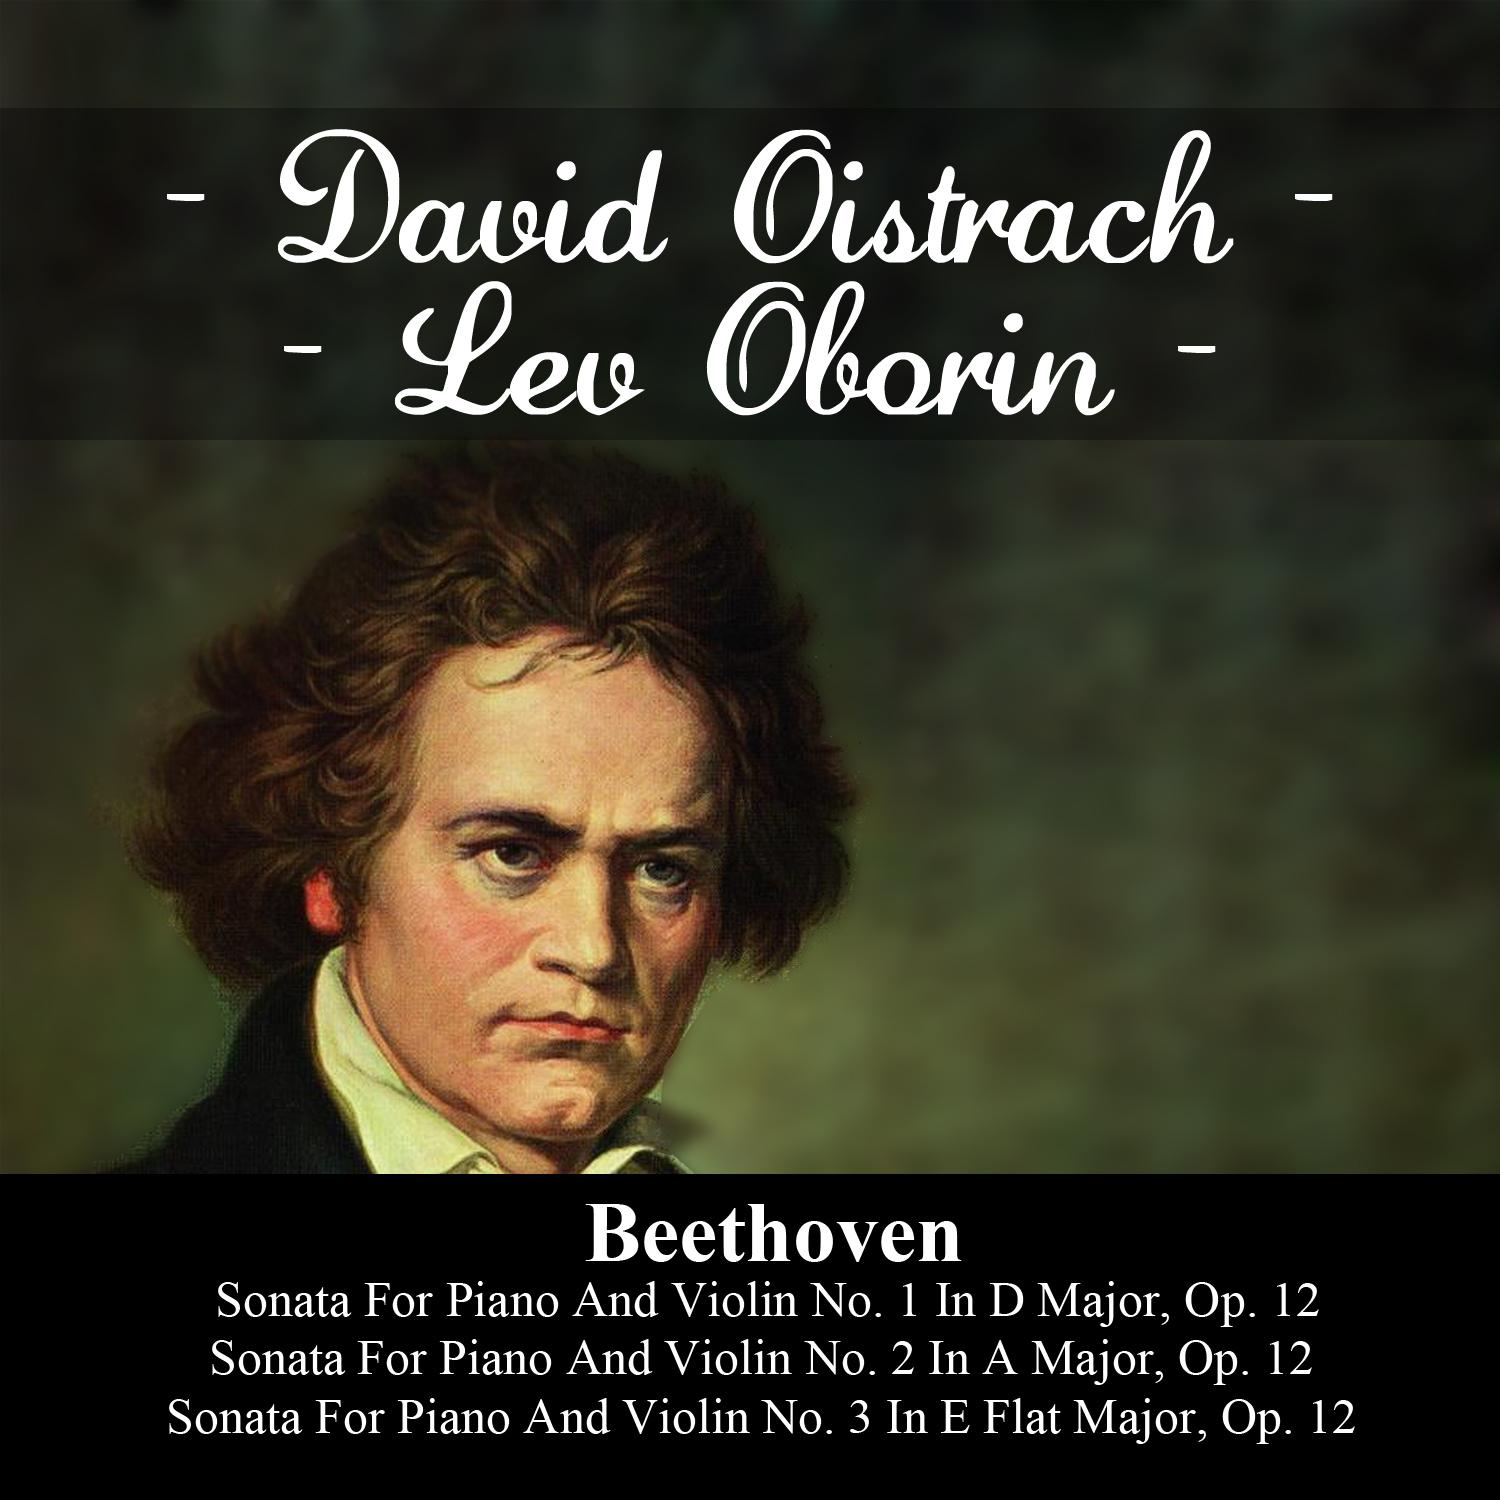 Beethoven: Sonata For Piano And Violin No. 1 In D Major, Op. 12 - Sonata For Piano And Violin No. 2 In A Major, Op. 12 - Sonata For Piano And Violin No. 3 In E Flat Major, Op. 12